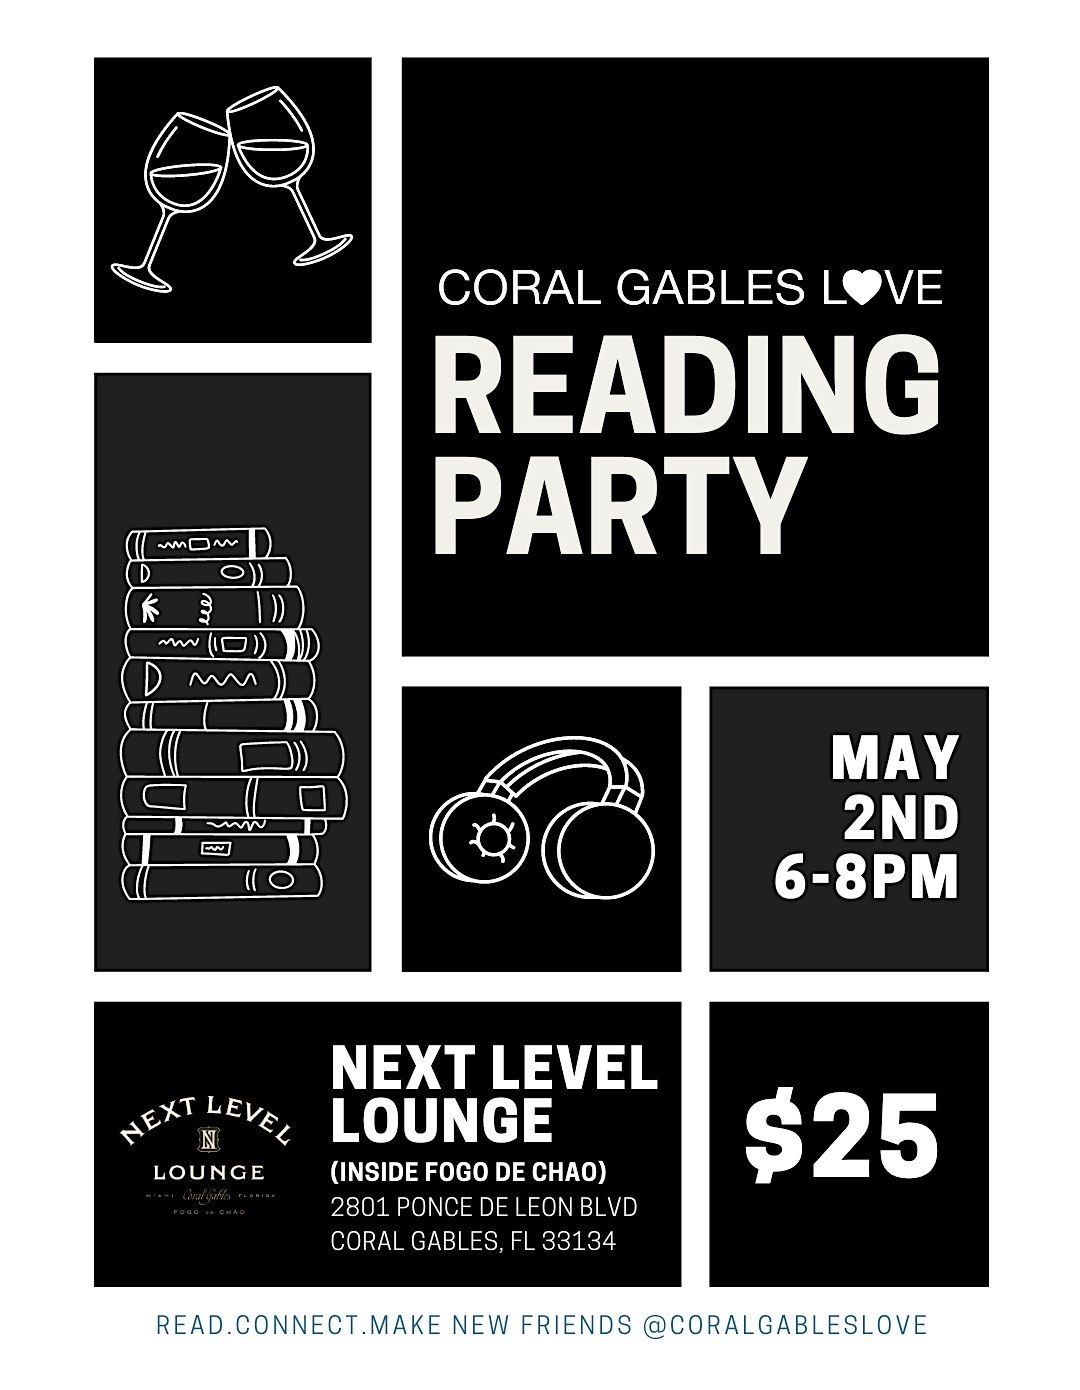 Coral Gables Love Reading Party - July